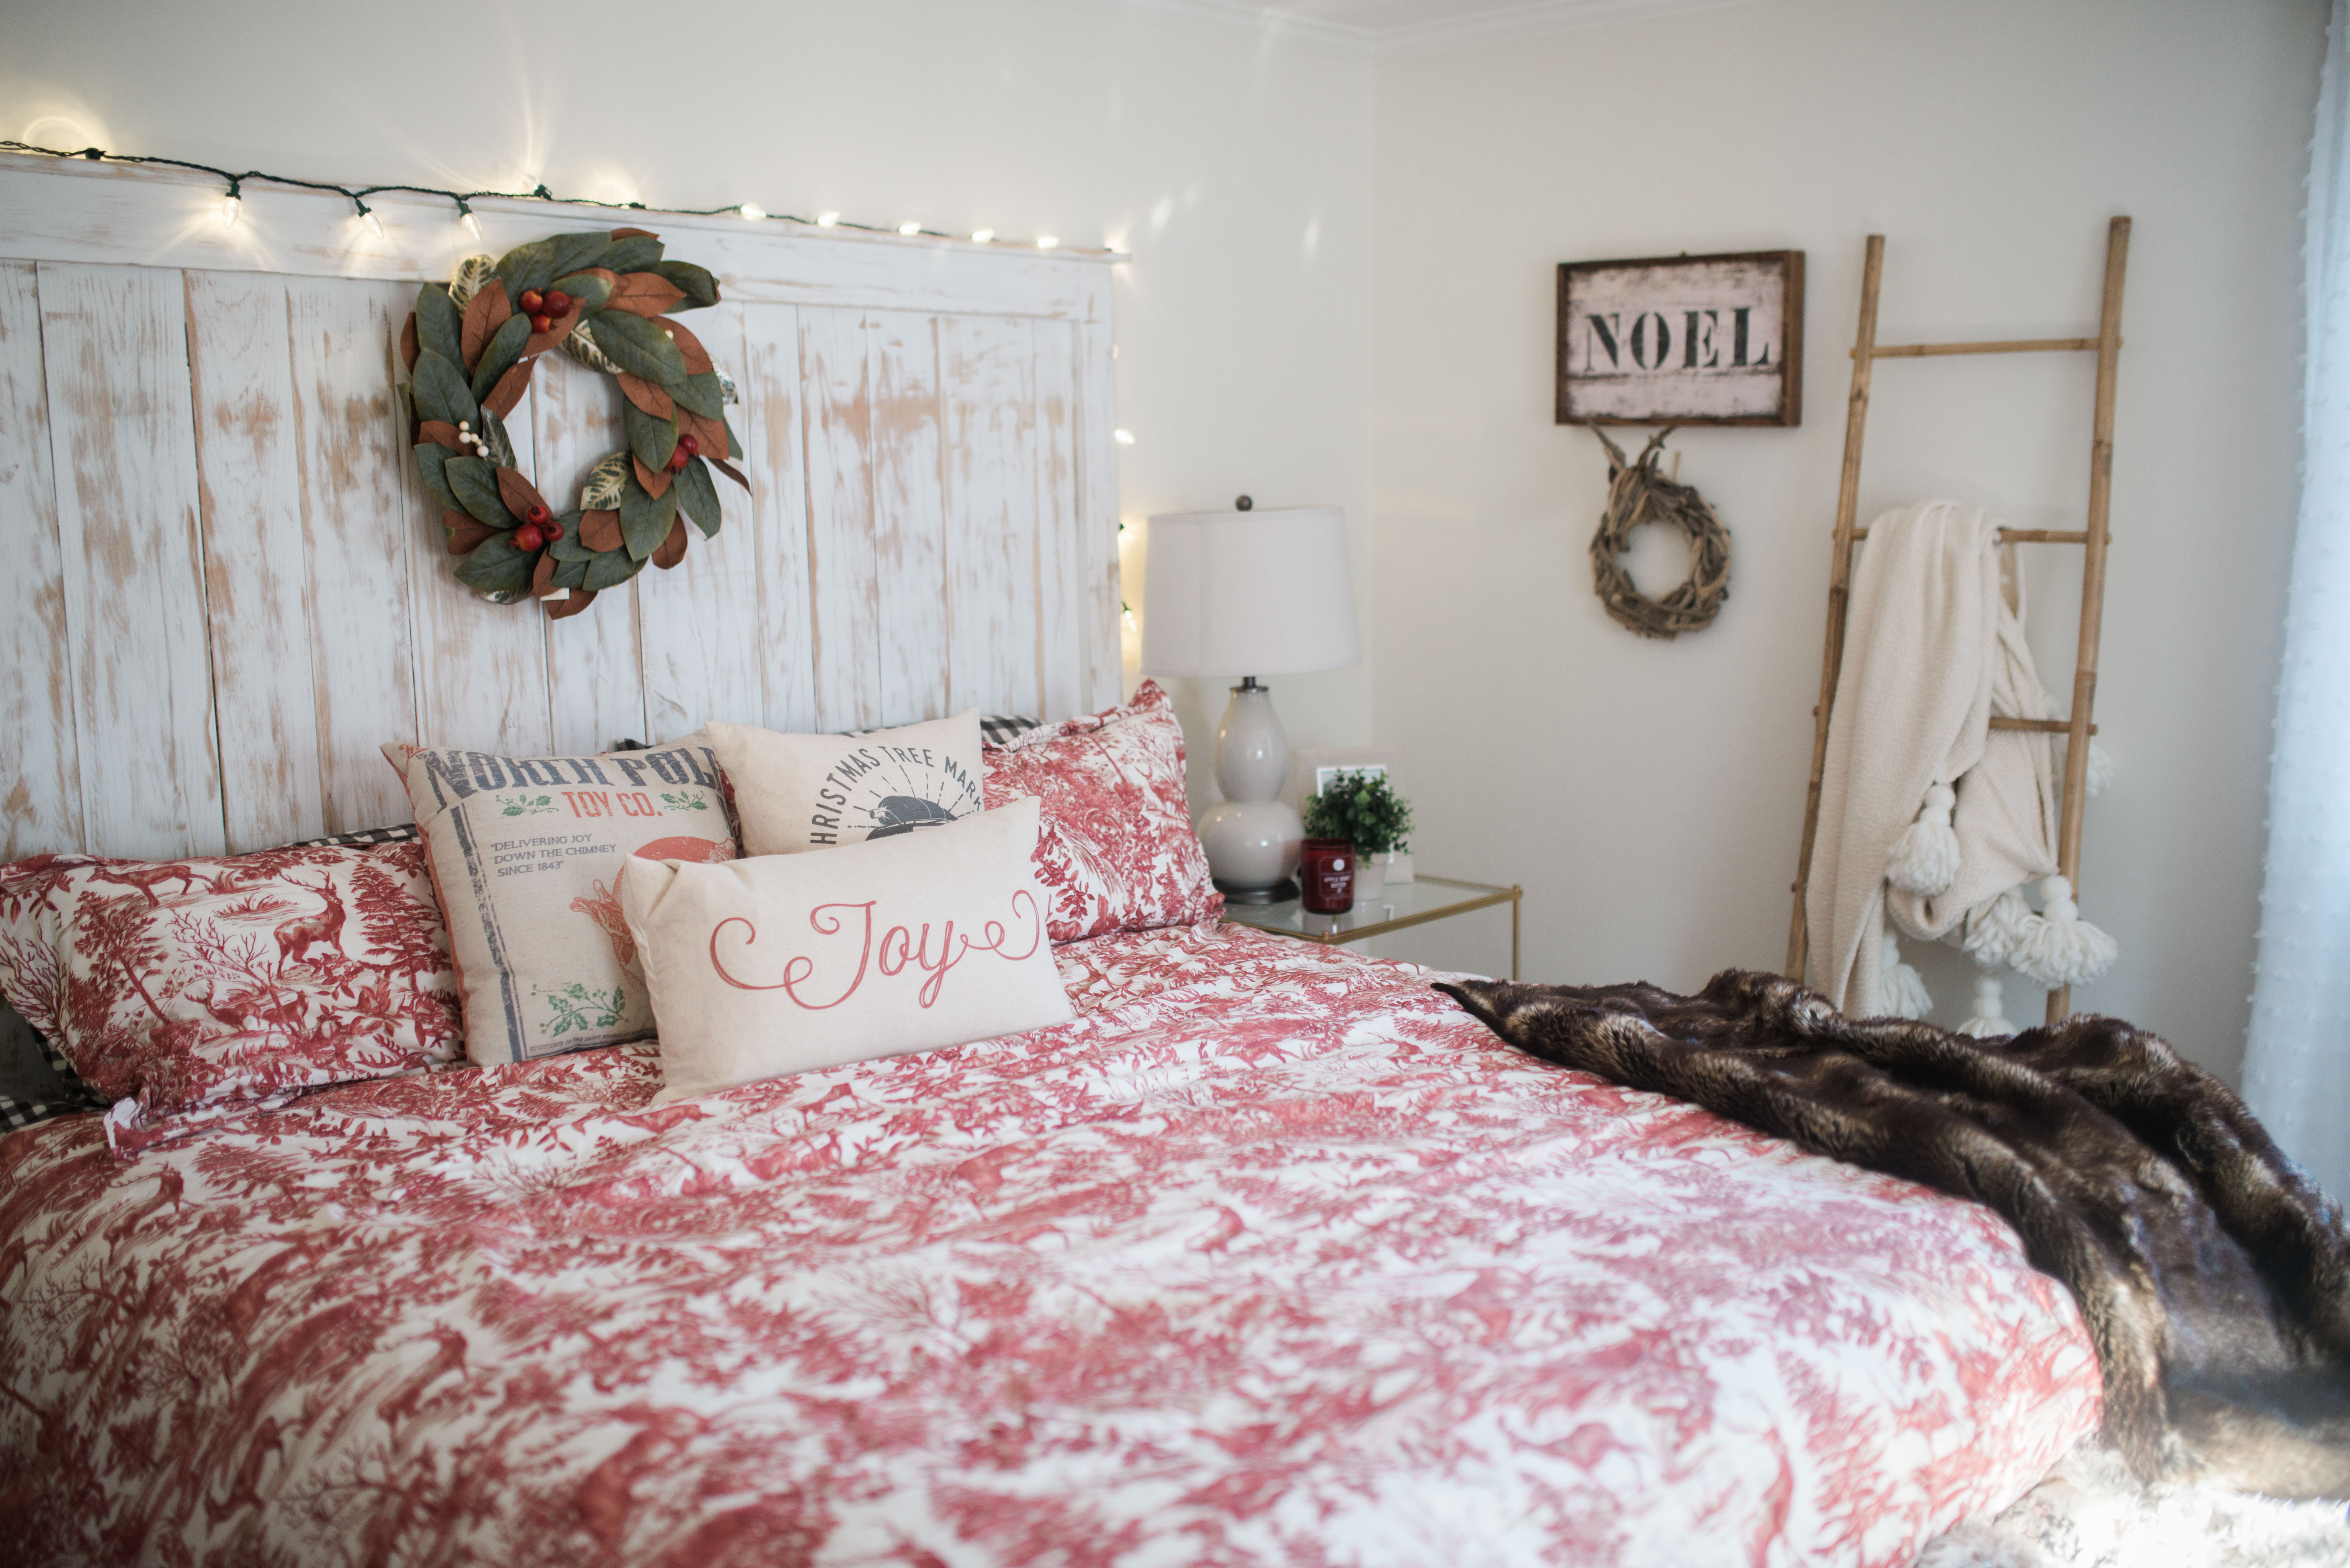 Our Bedroom holiday decor // Bedroom Wall Decorations